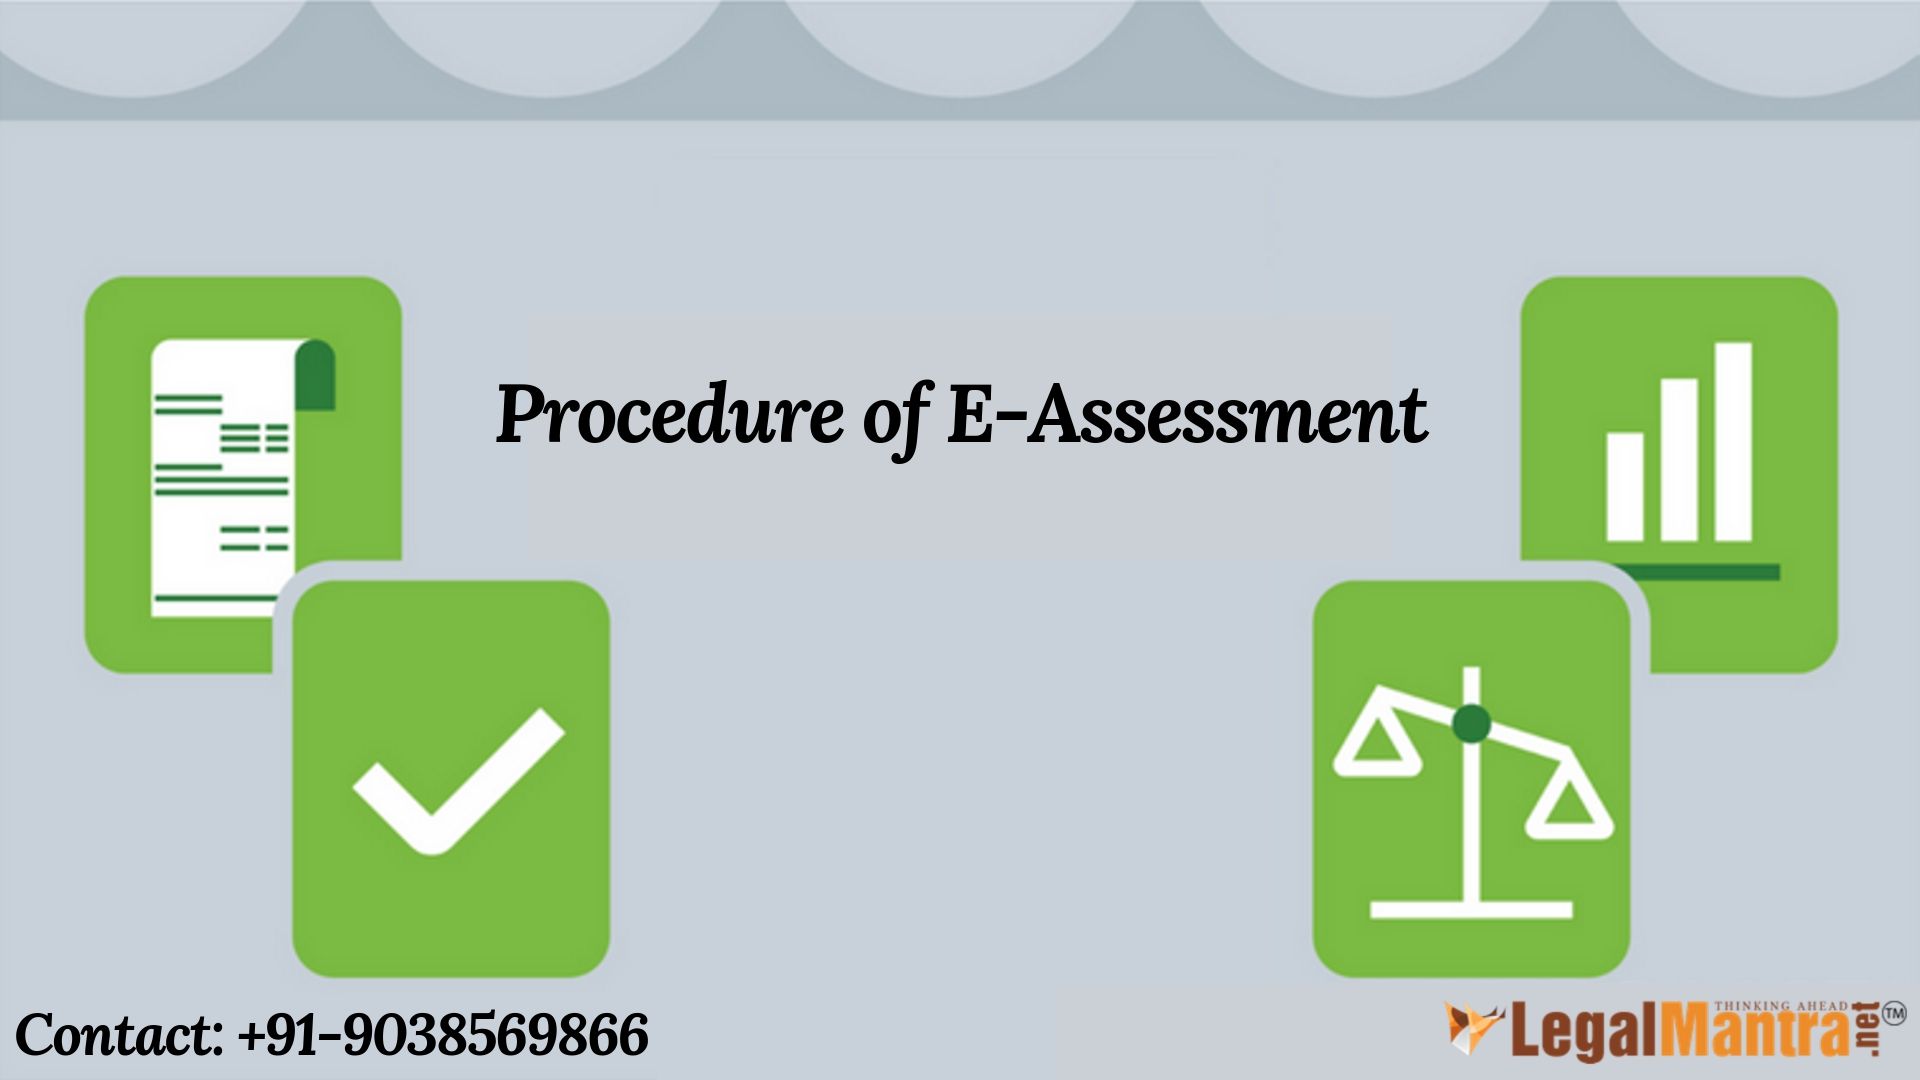 Procedure of E-Assessment in Nutshell